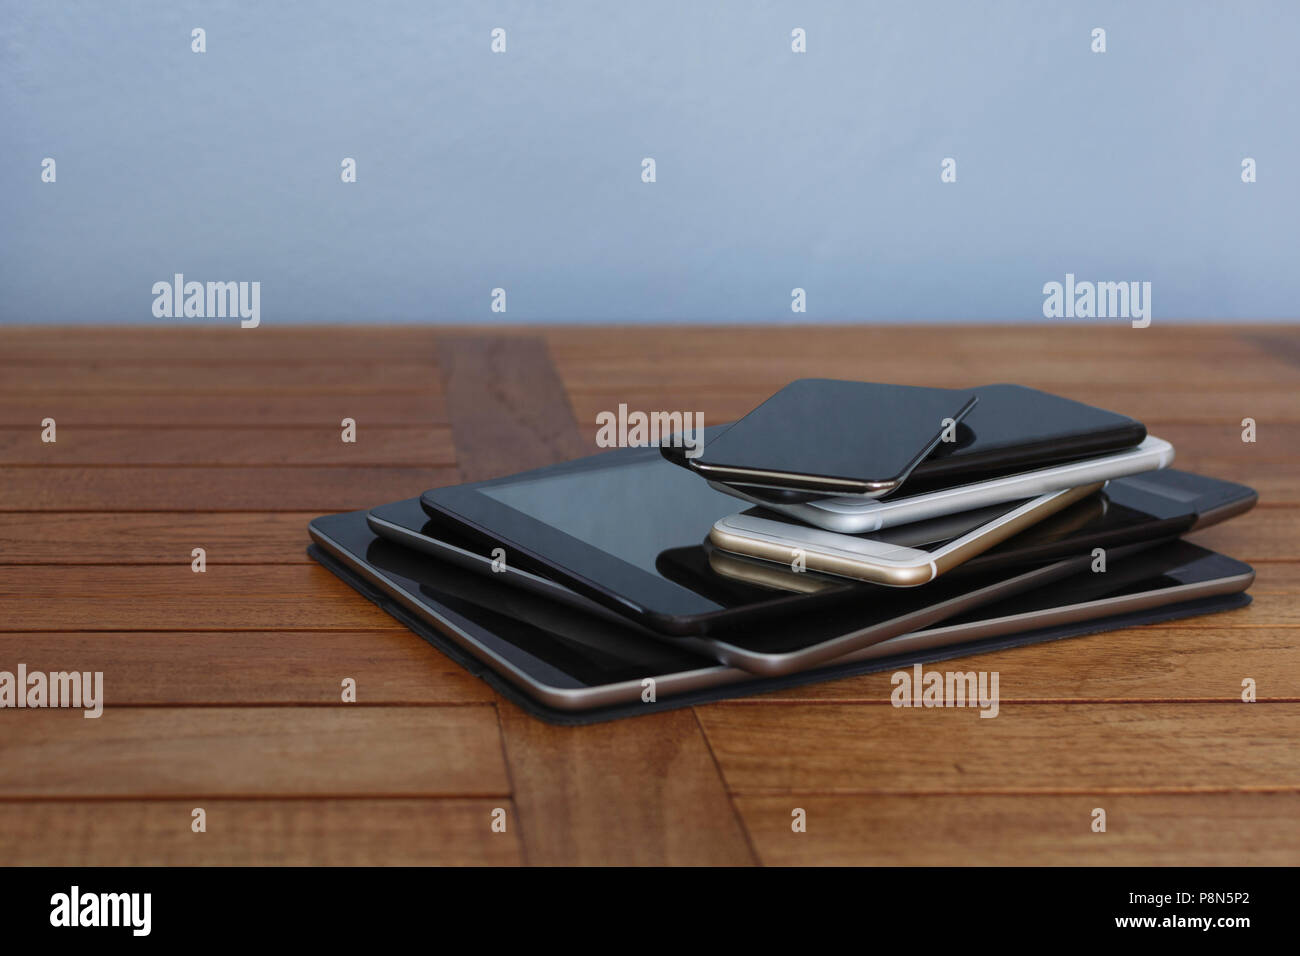 Stack of smart phones and digital tablets Stock Photo